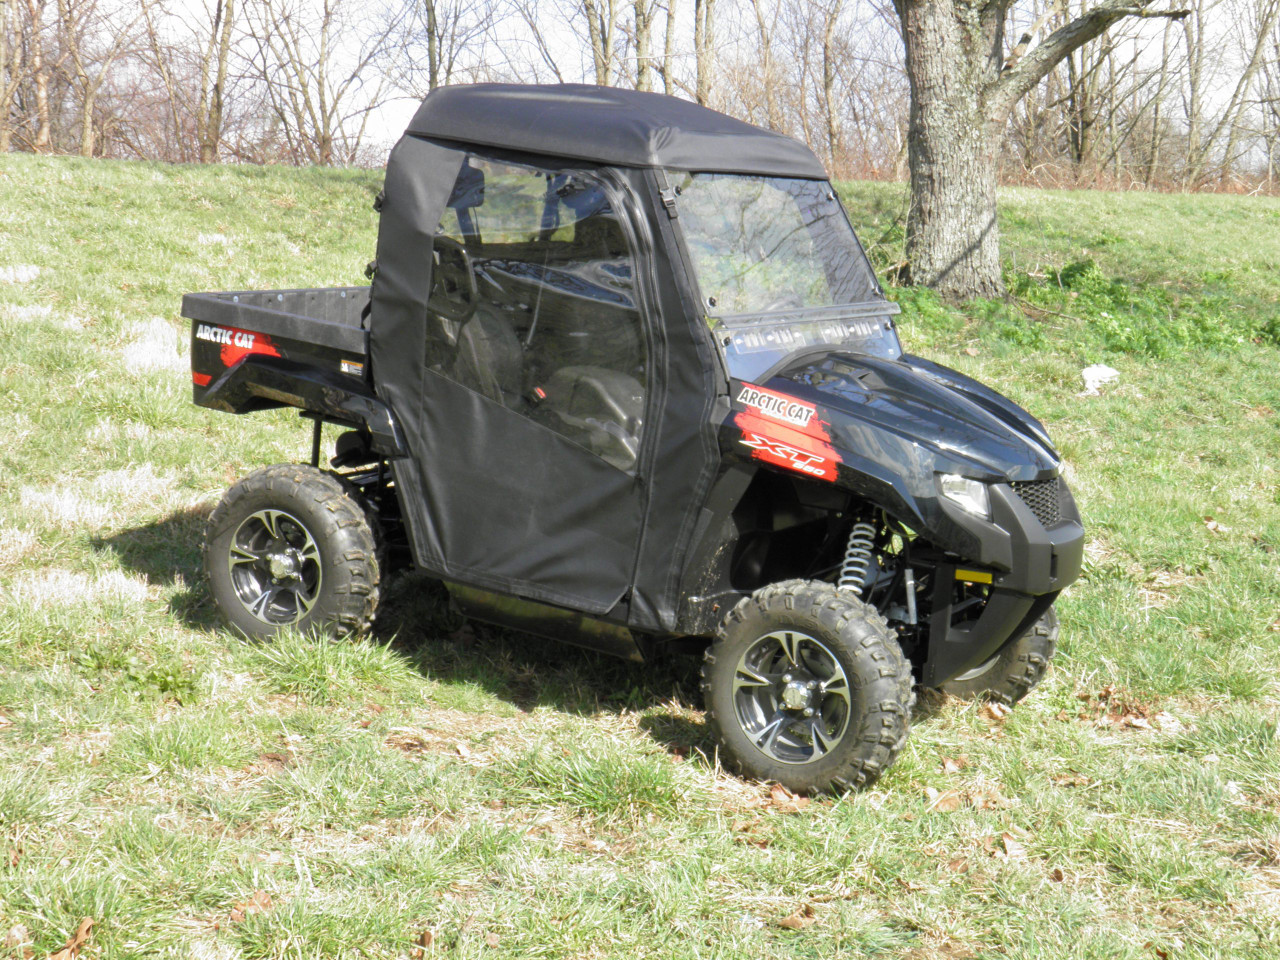 Full cab enclosure for hard windshield front and side view